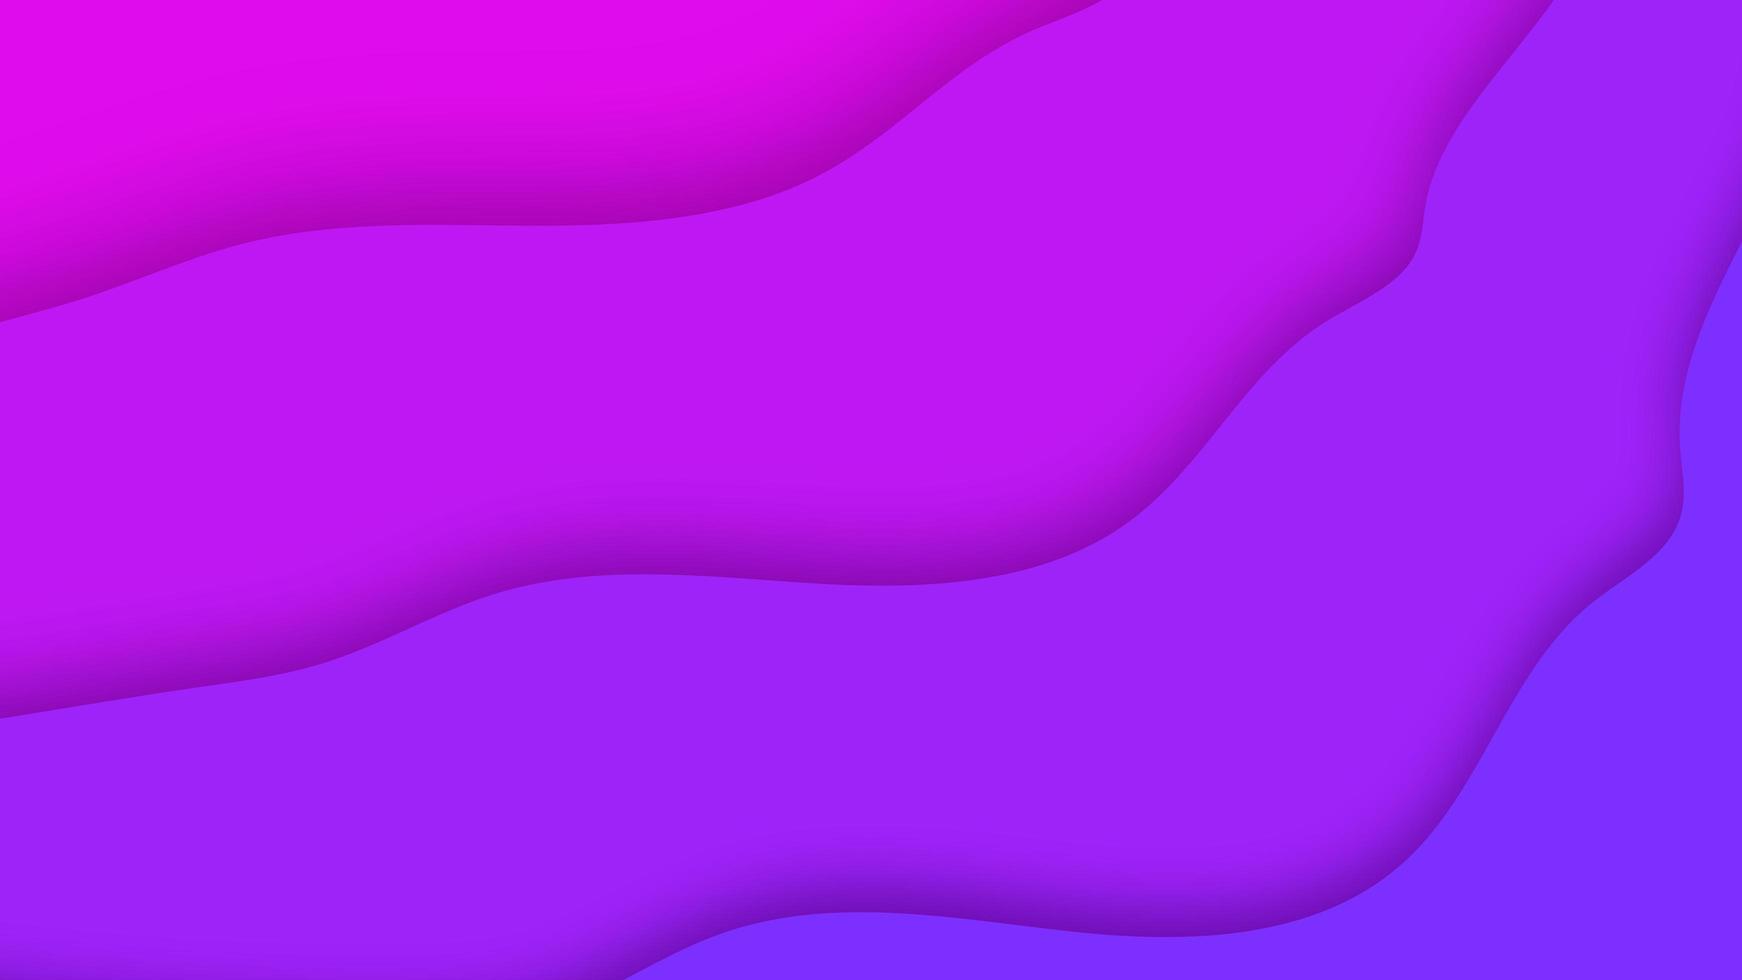 Abstract Pink and purple gradient background with wave shape photo